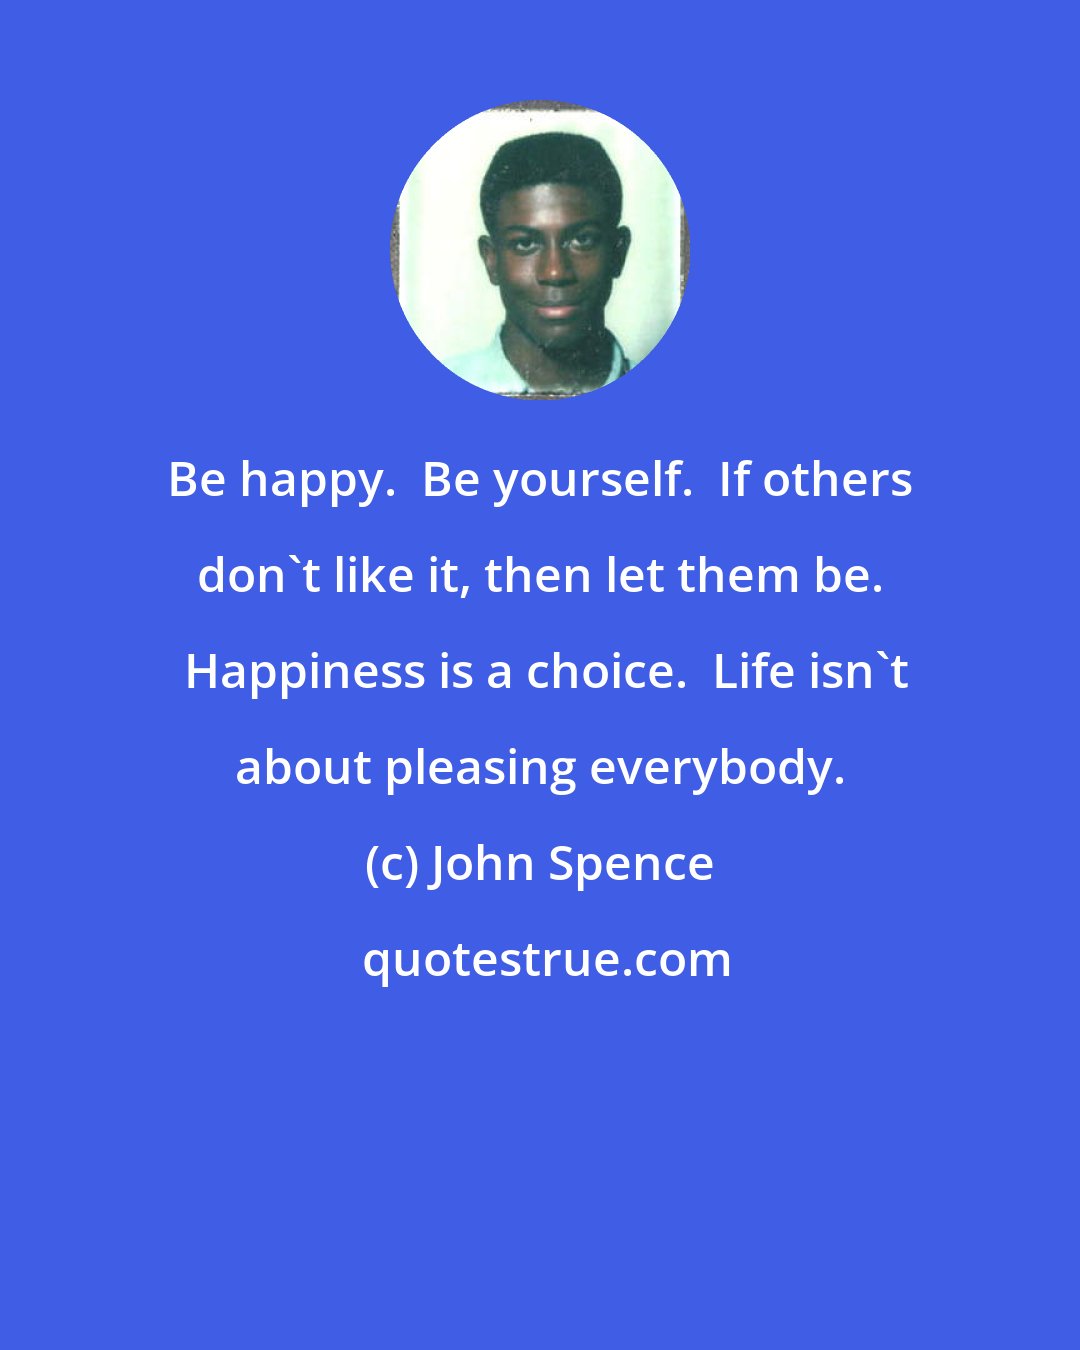 John Spence: Be happy.  Be yourself.  If others don't like it, then let them be.  Happiness is a choice.  Life isn't about pleasing everybody.